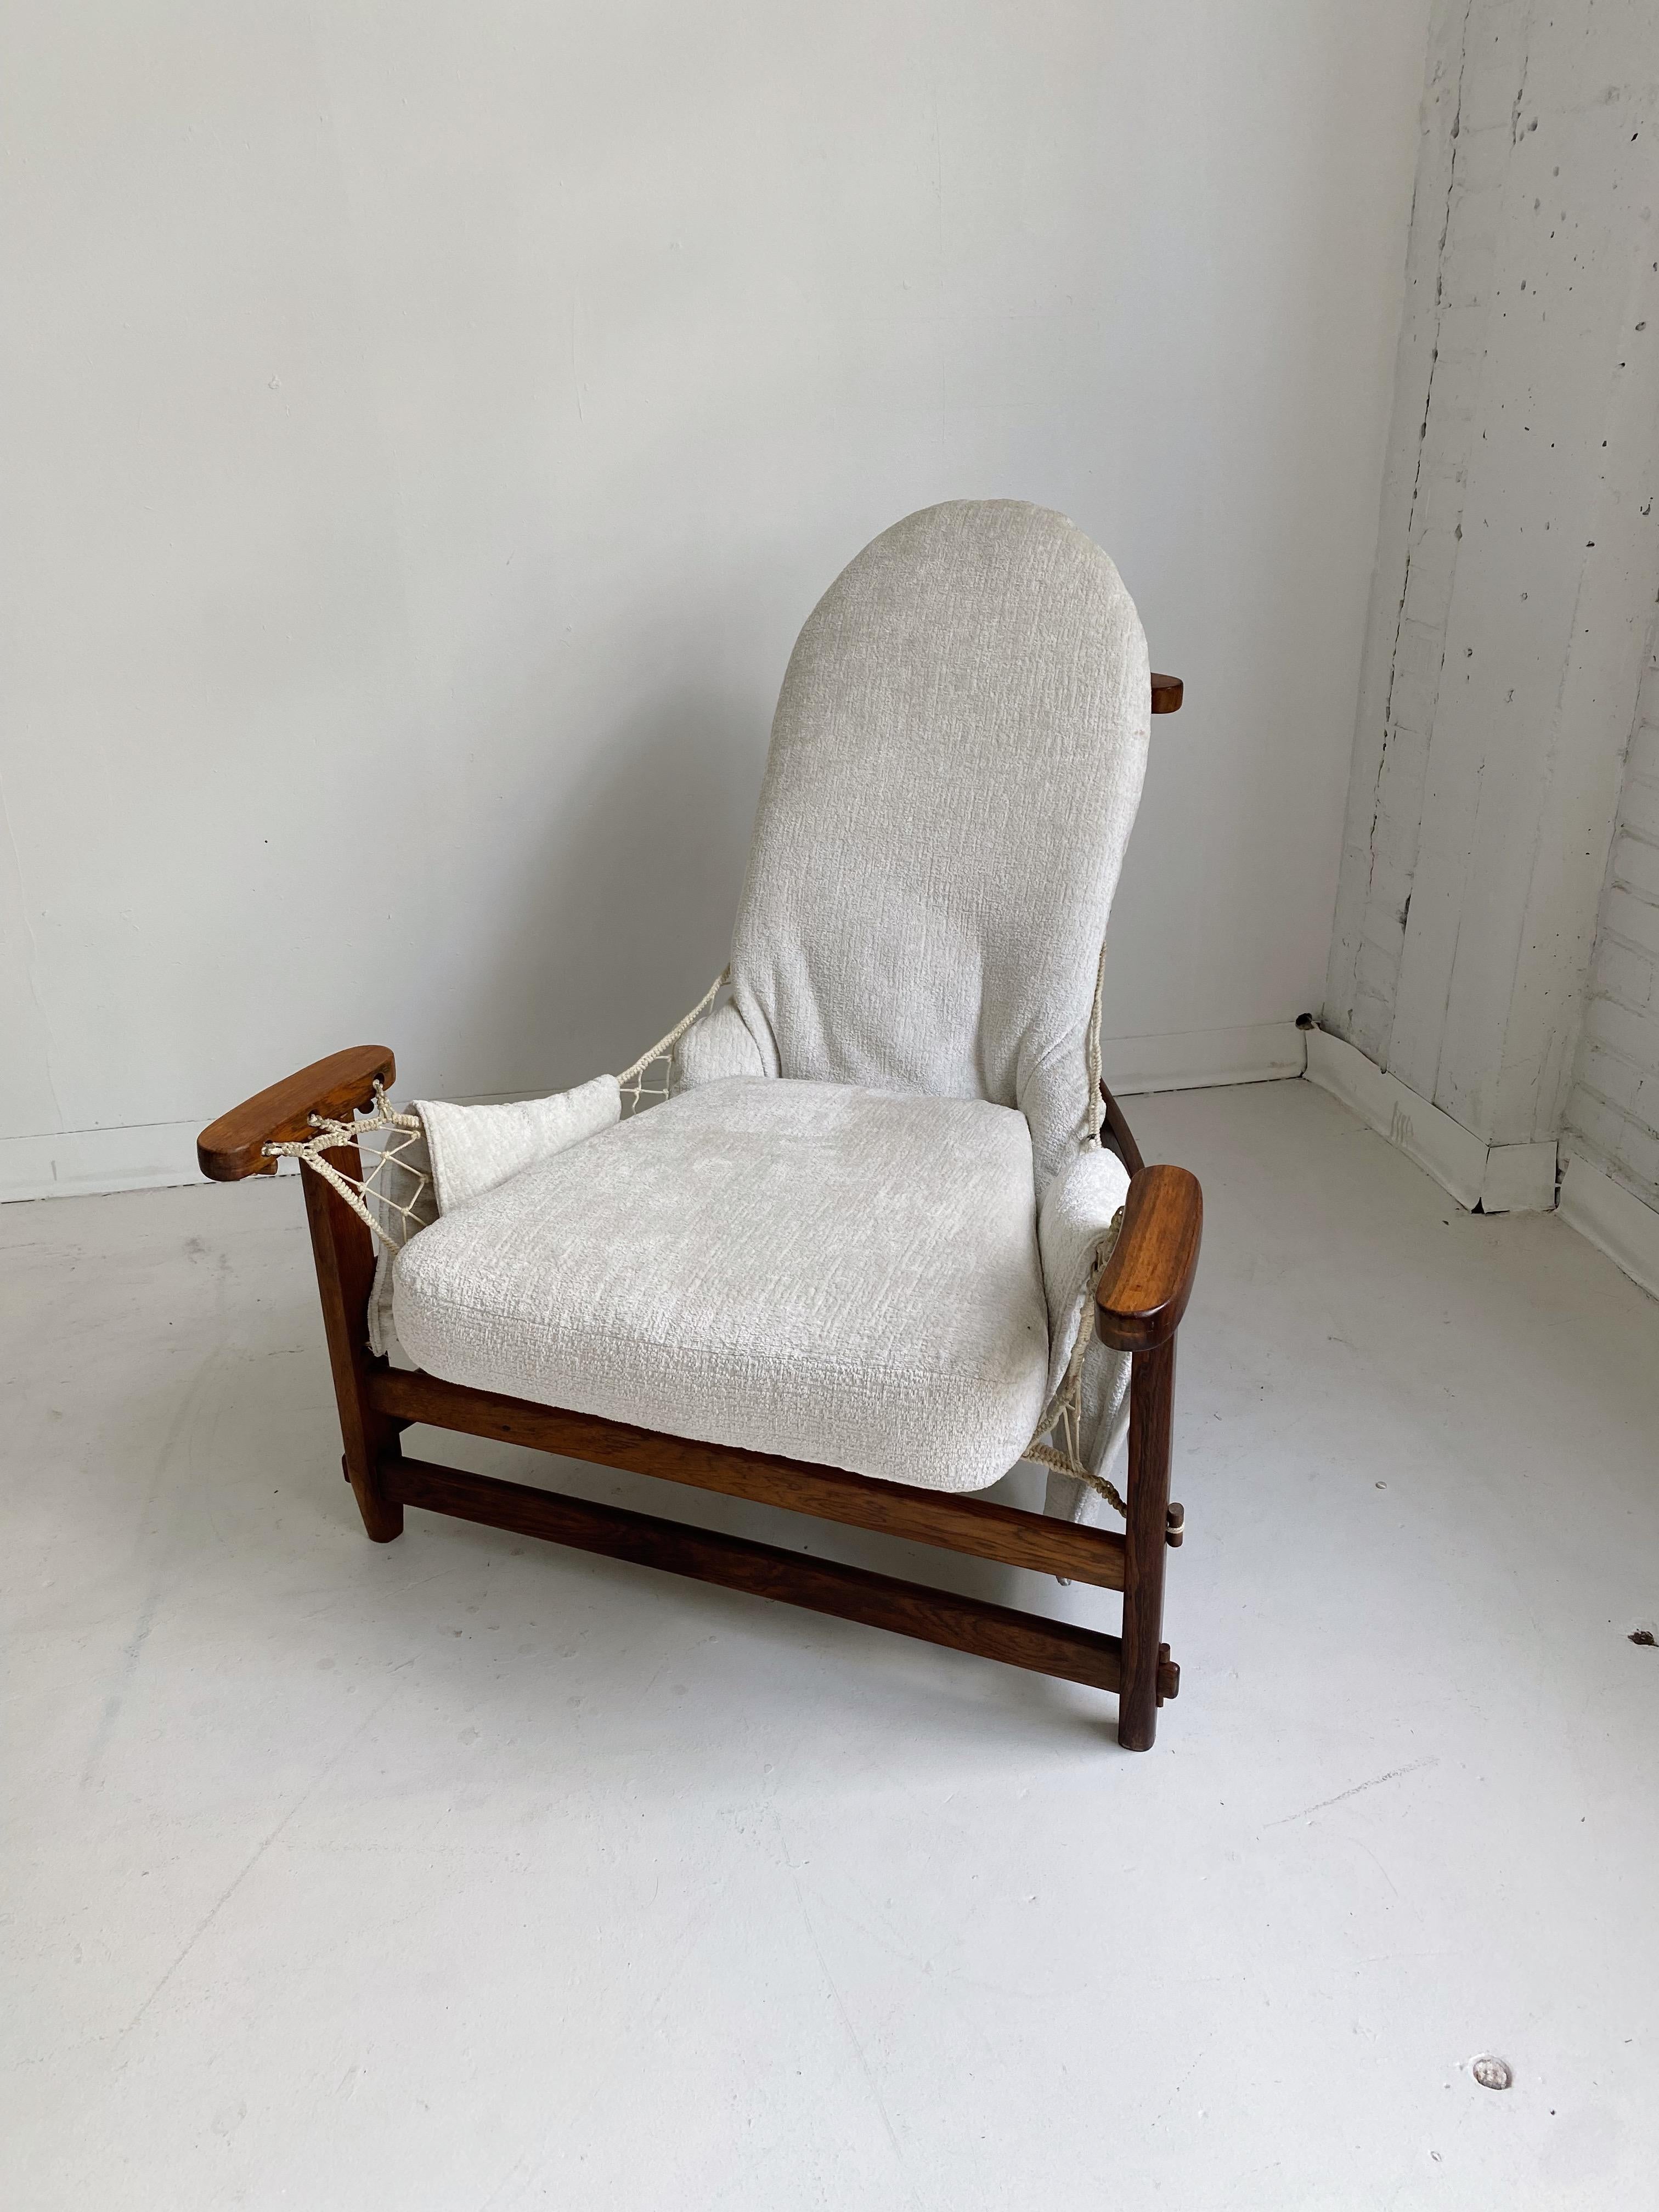 Vintage Jangada lounge chair by Jean Gillon, 60's.

Features a jacaranda frame, hammock like base made of nylon ropes. Reupholstered for extra comfort with added cushions and chenille fabric.

Original style leather upholstery can be provided for